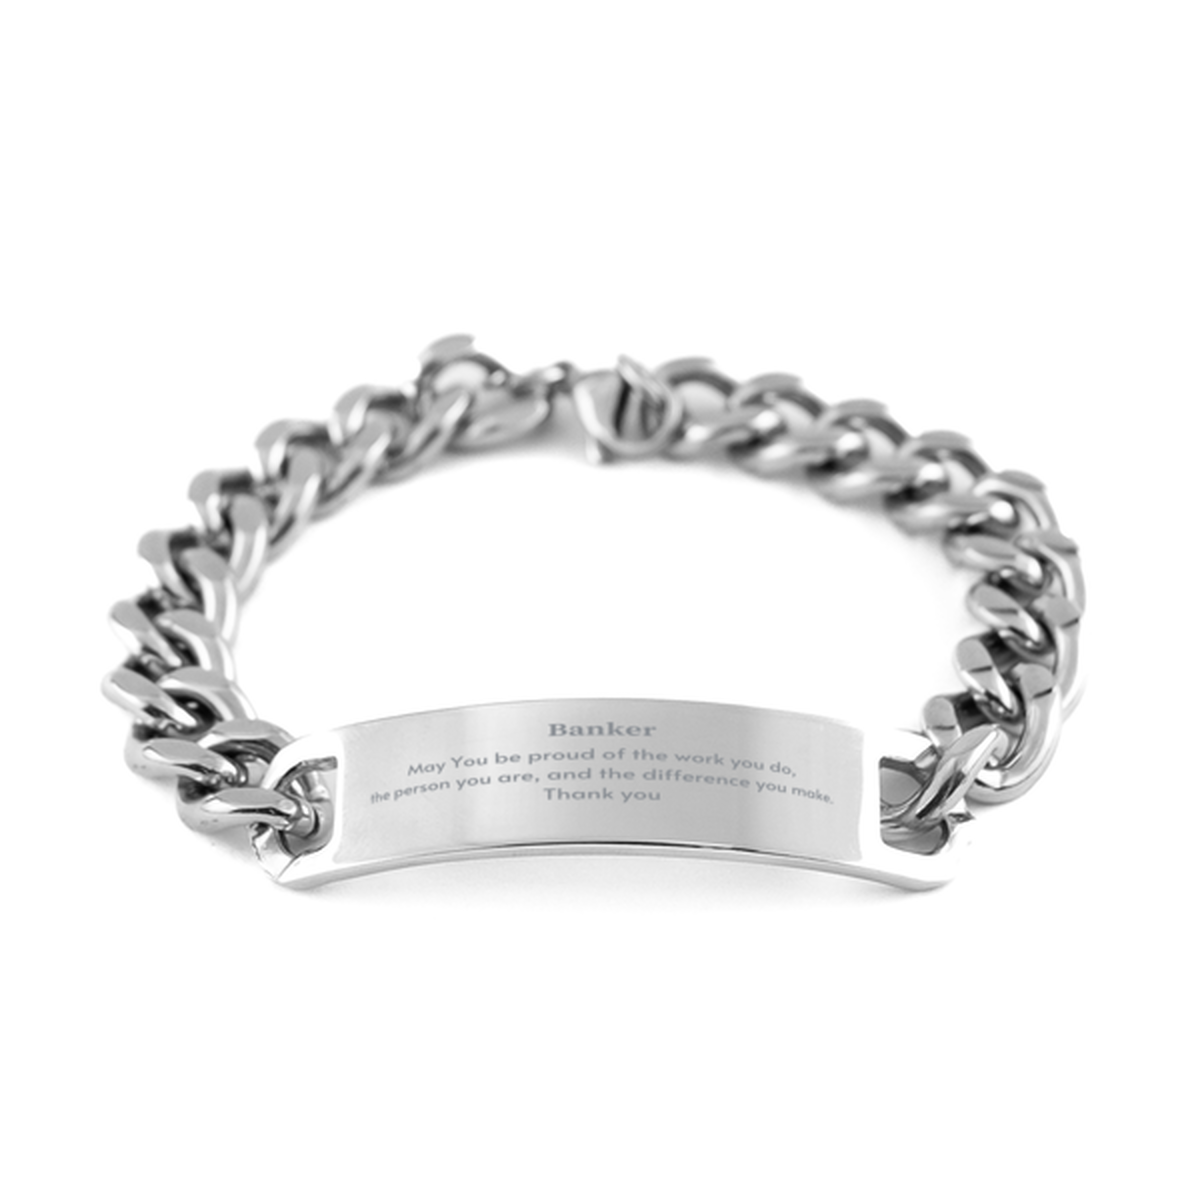 Heartwarming Cuban Chain Stainless Steel Bracelet Retirement Coworkers Gifts for Banker, Banker May You be proud of the work you do, the person you are Gifts for Boss Men Women Friends